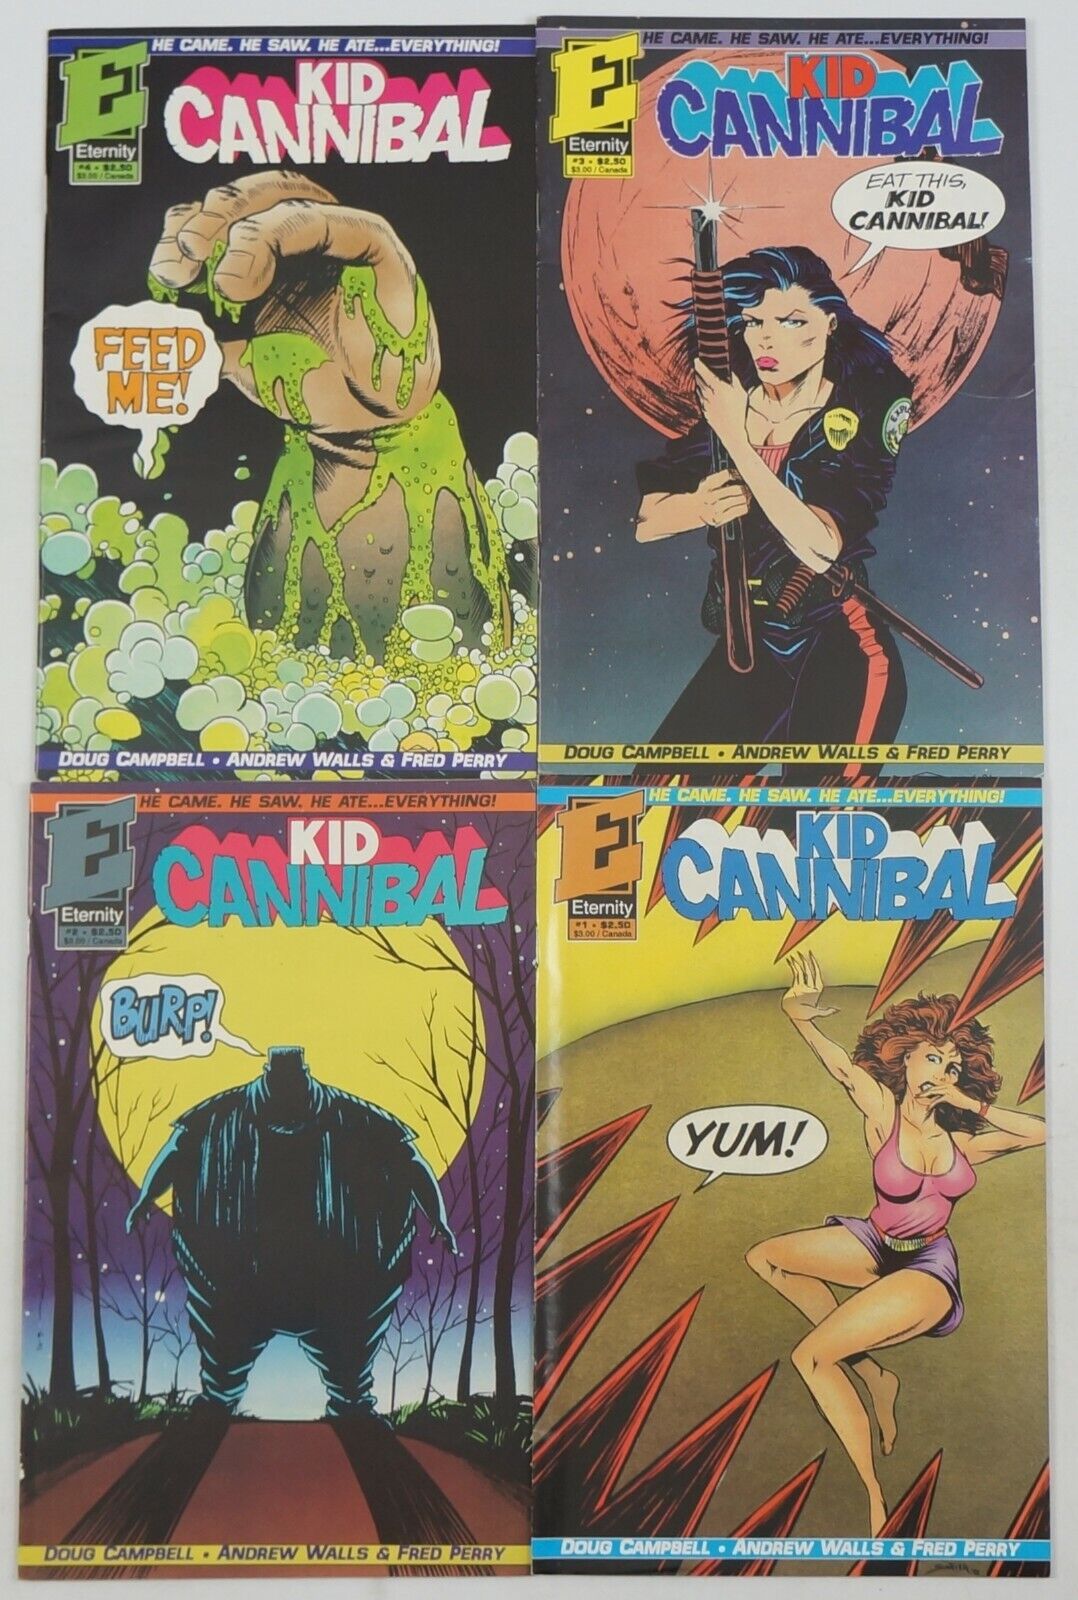 Kid Cannibal #1-4 FN+ complete series HE CAME. HE SAW. HE ATE ... EVERYTHING